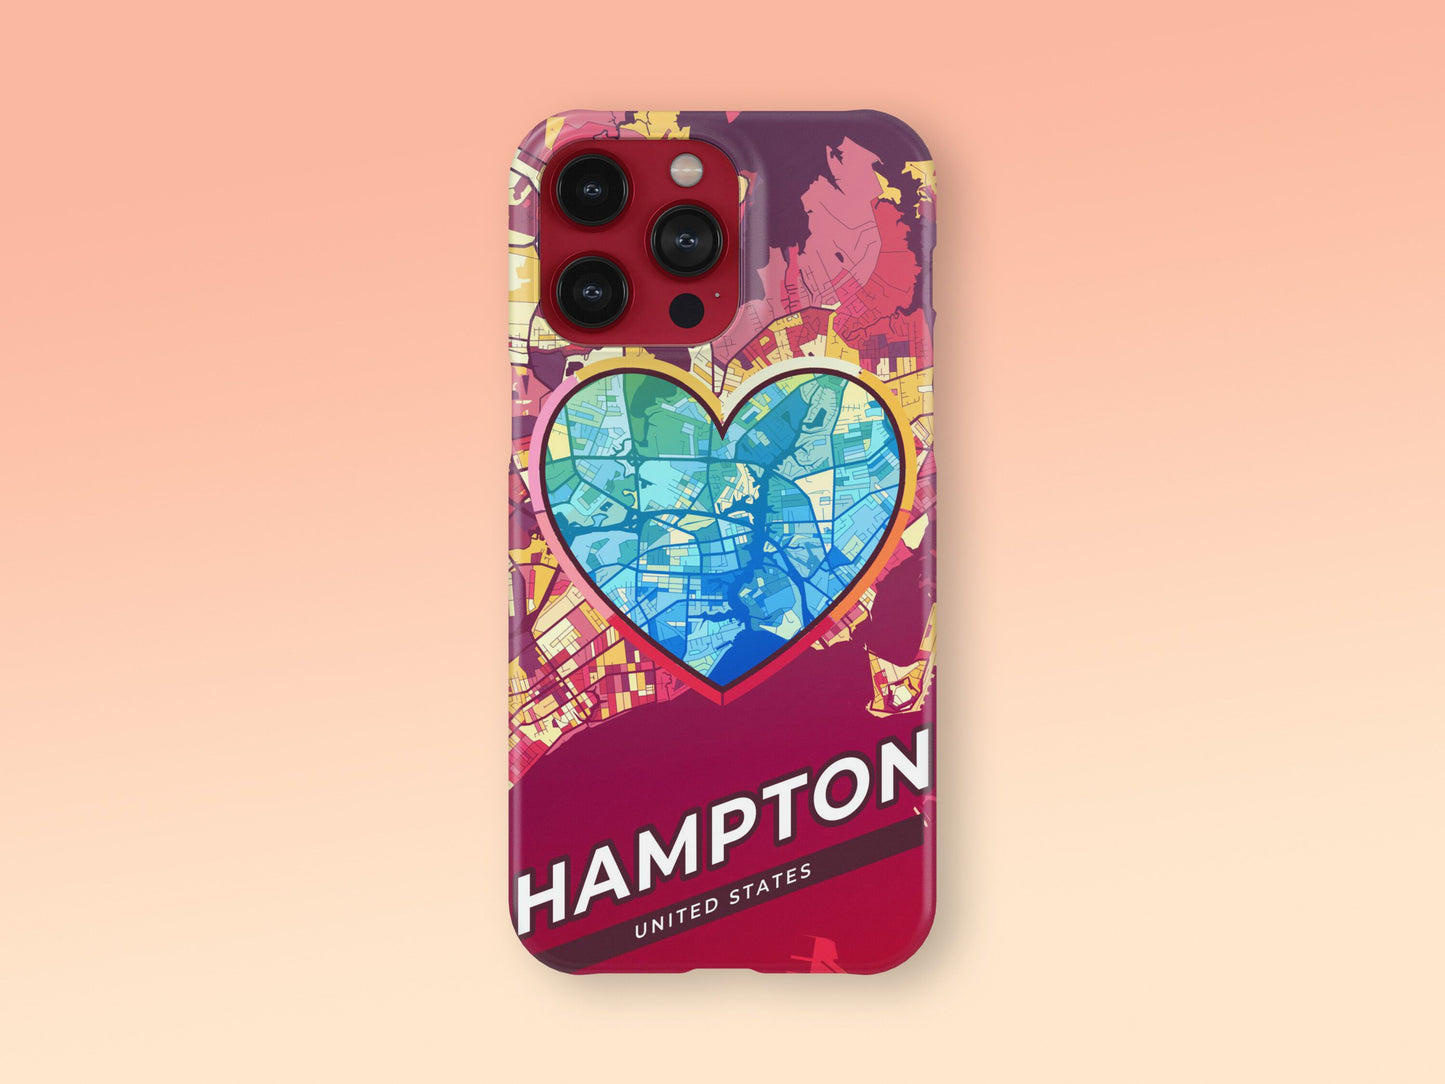 Hampton Virginia slim phone case with colorful icon. Birthday, wedding or housewarming gift. Couple match cases. 2